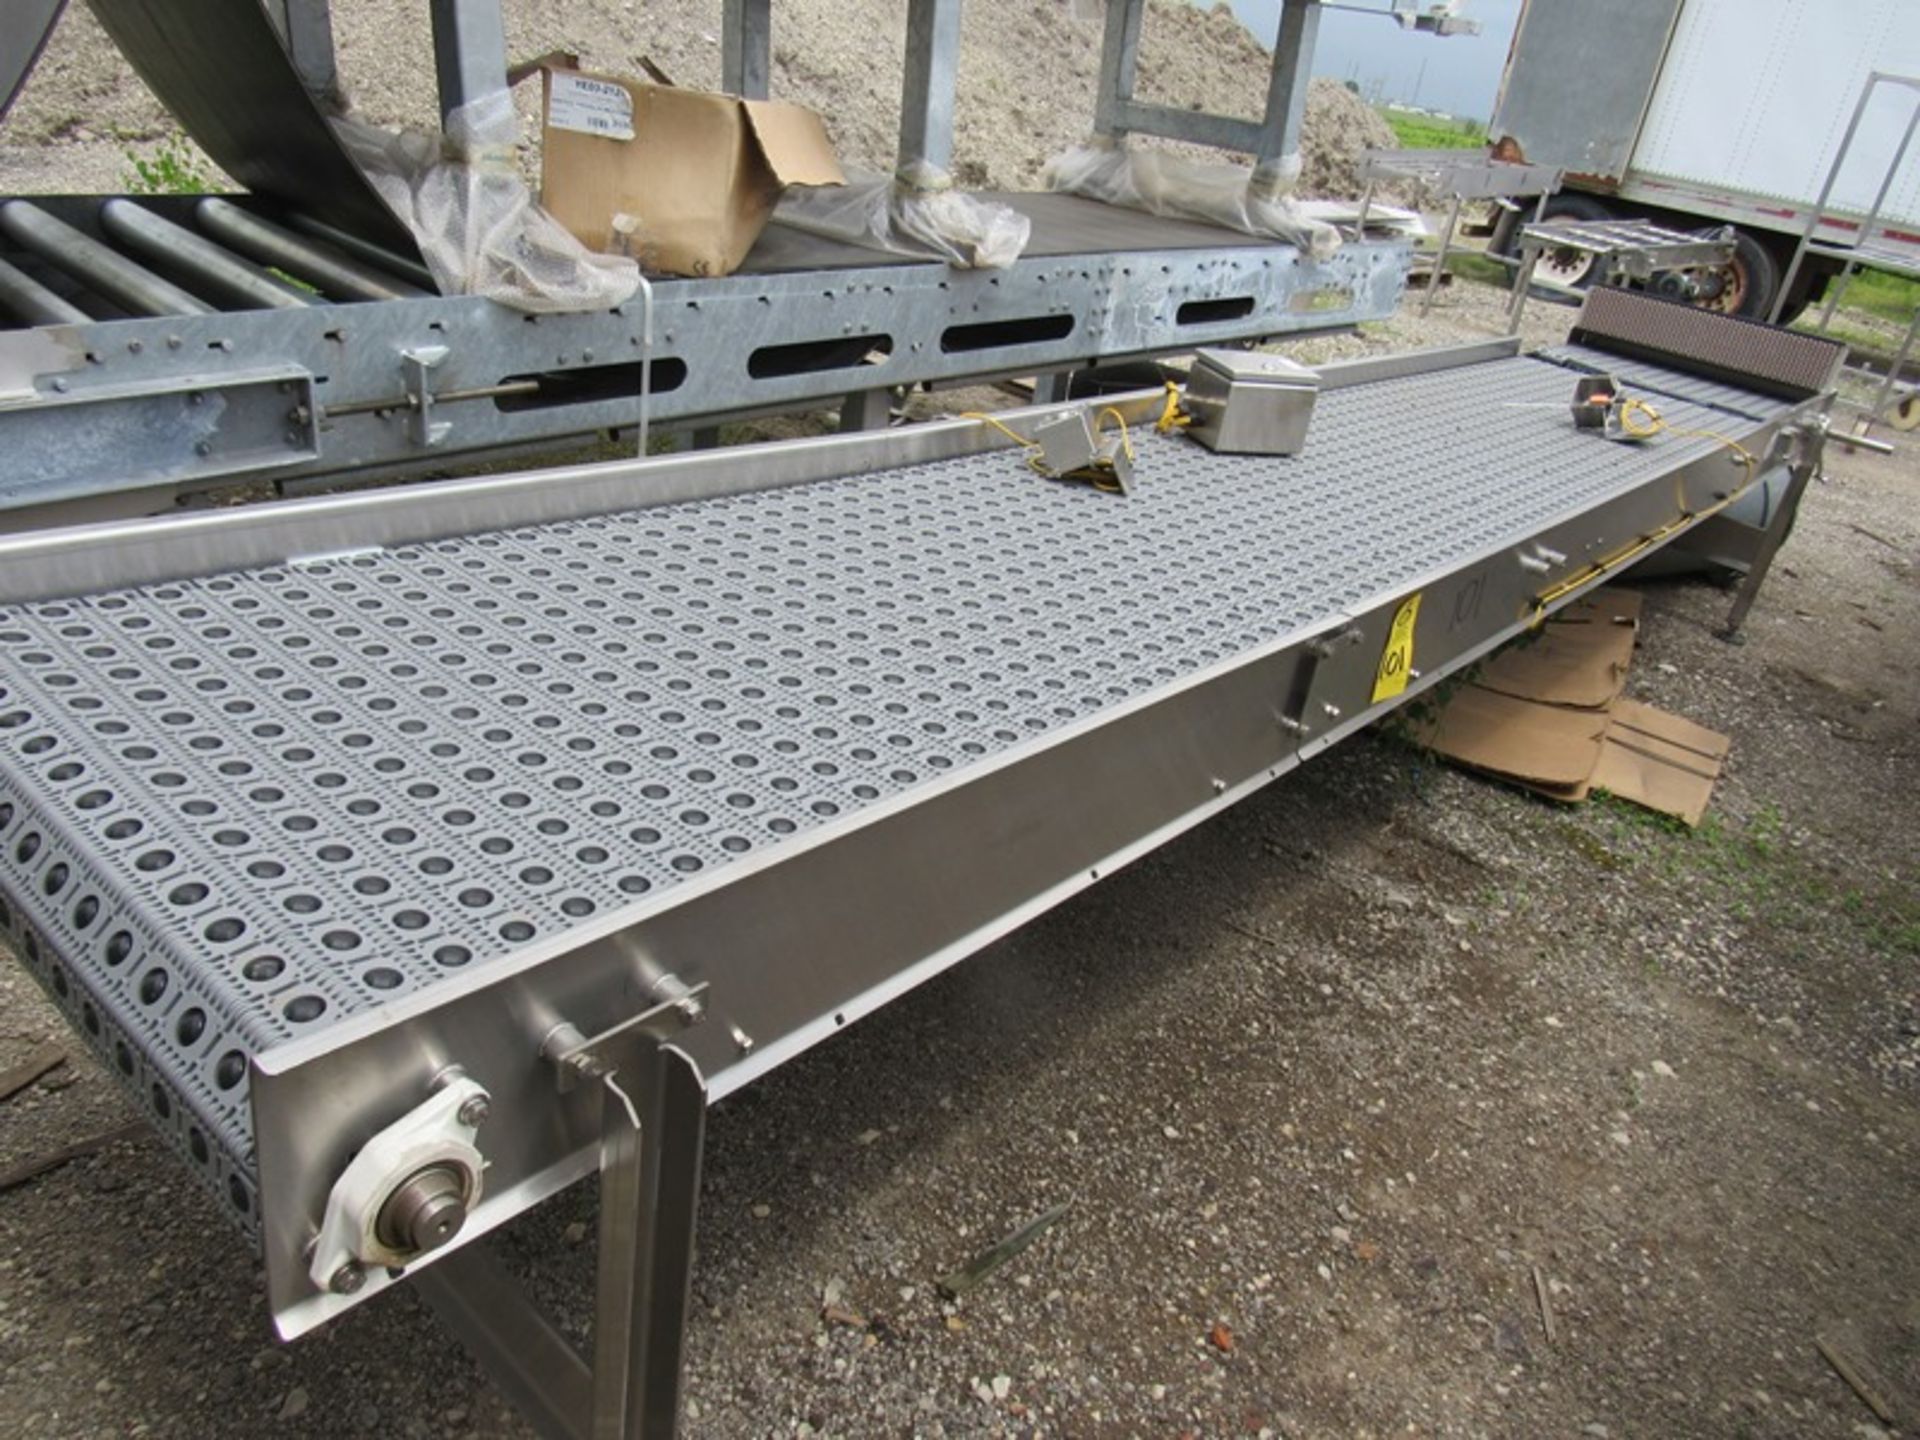 BMI Stainless Steel Conveyor, 30" W X 16' Long plastic belt (Loading Fee: $150.00 - Rigger: Norm